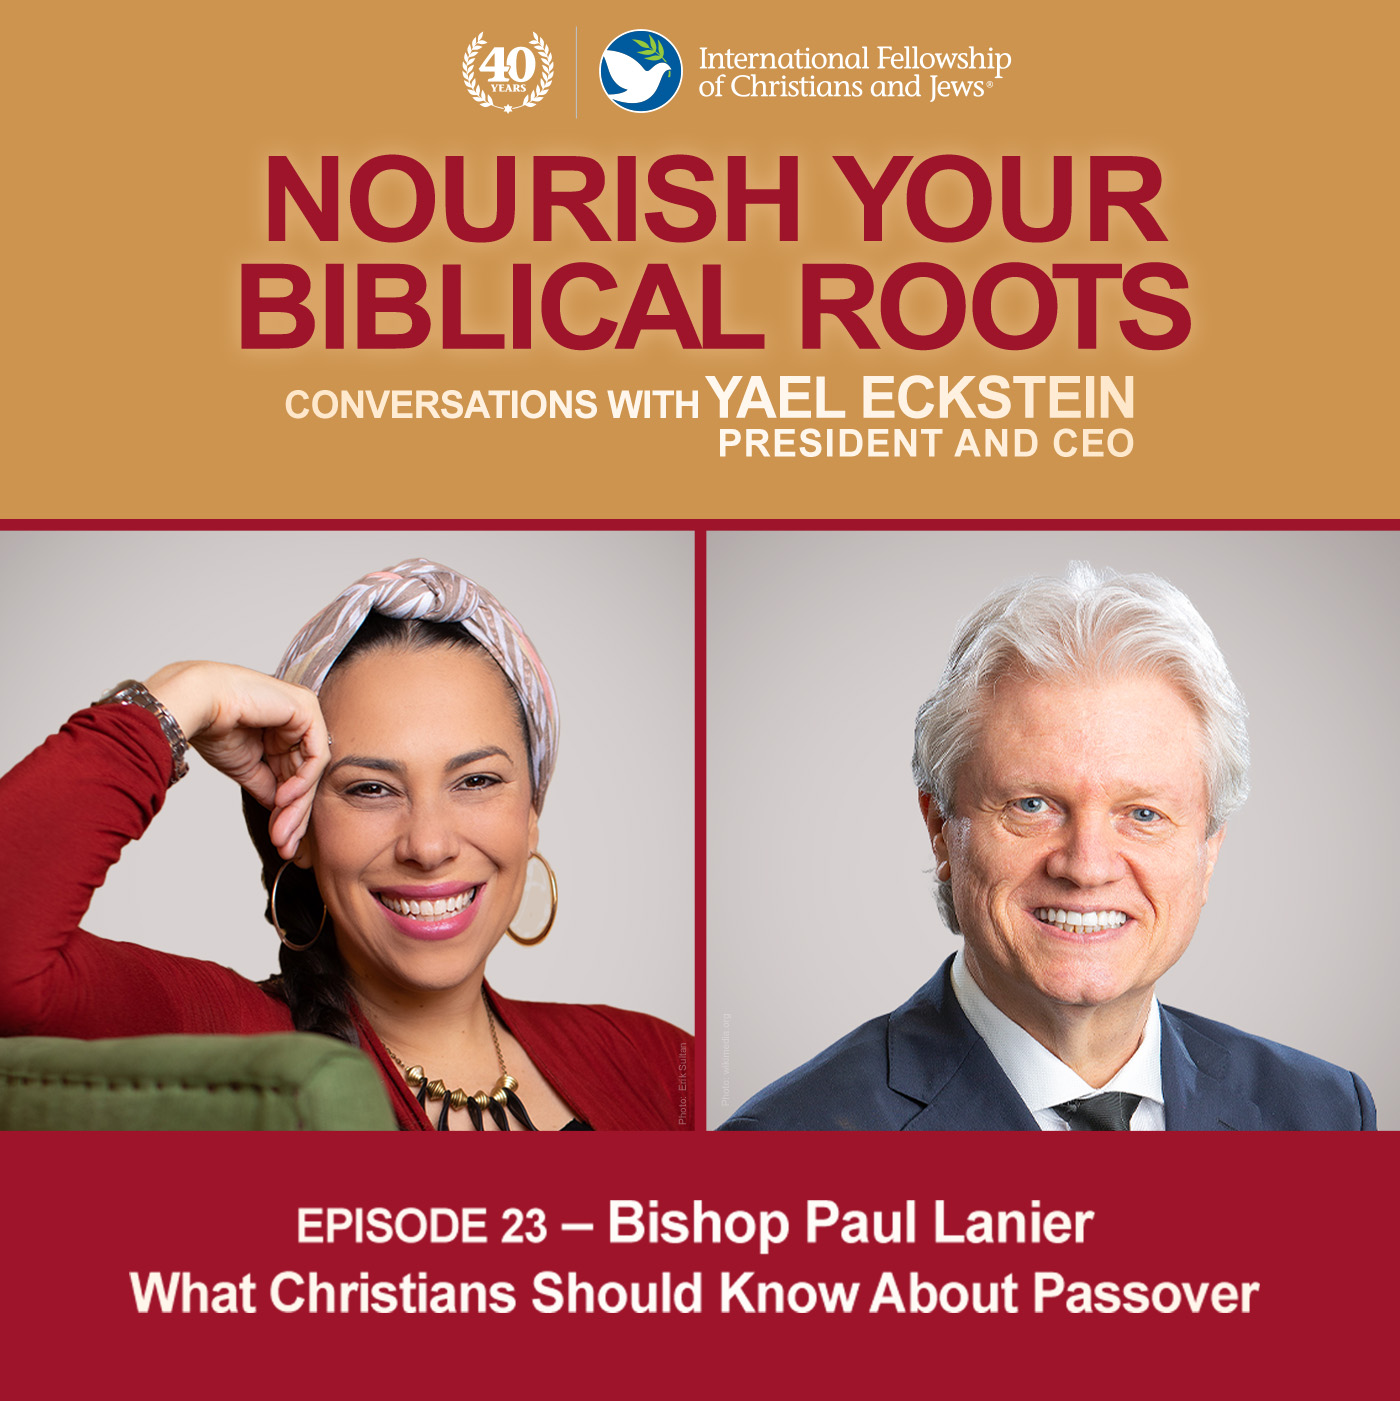 Conversations with Yael Eckstein: Bishop Paul Lanier — What Christians Should Know About Passover